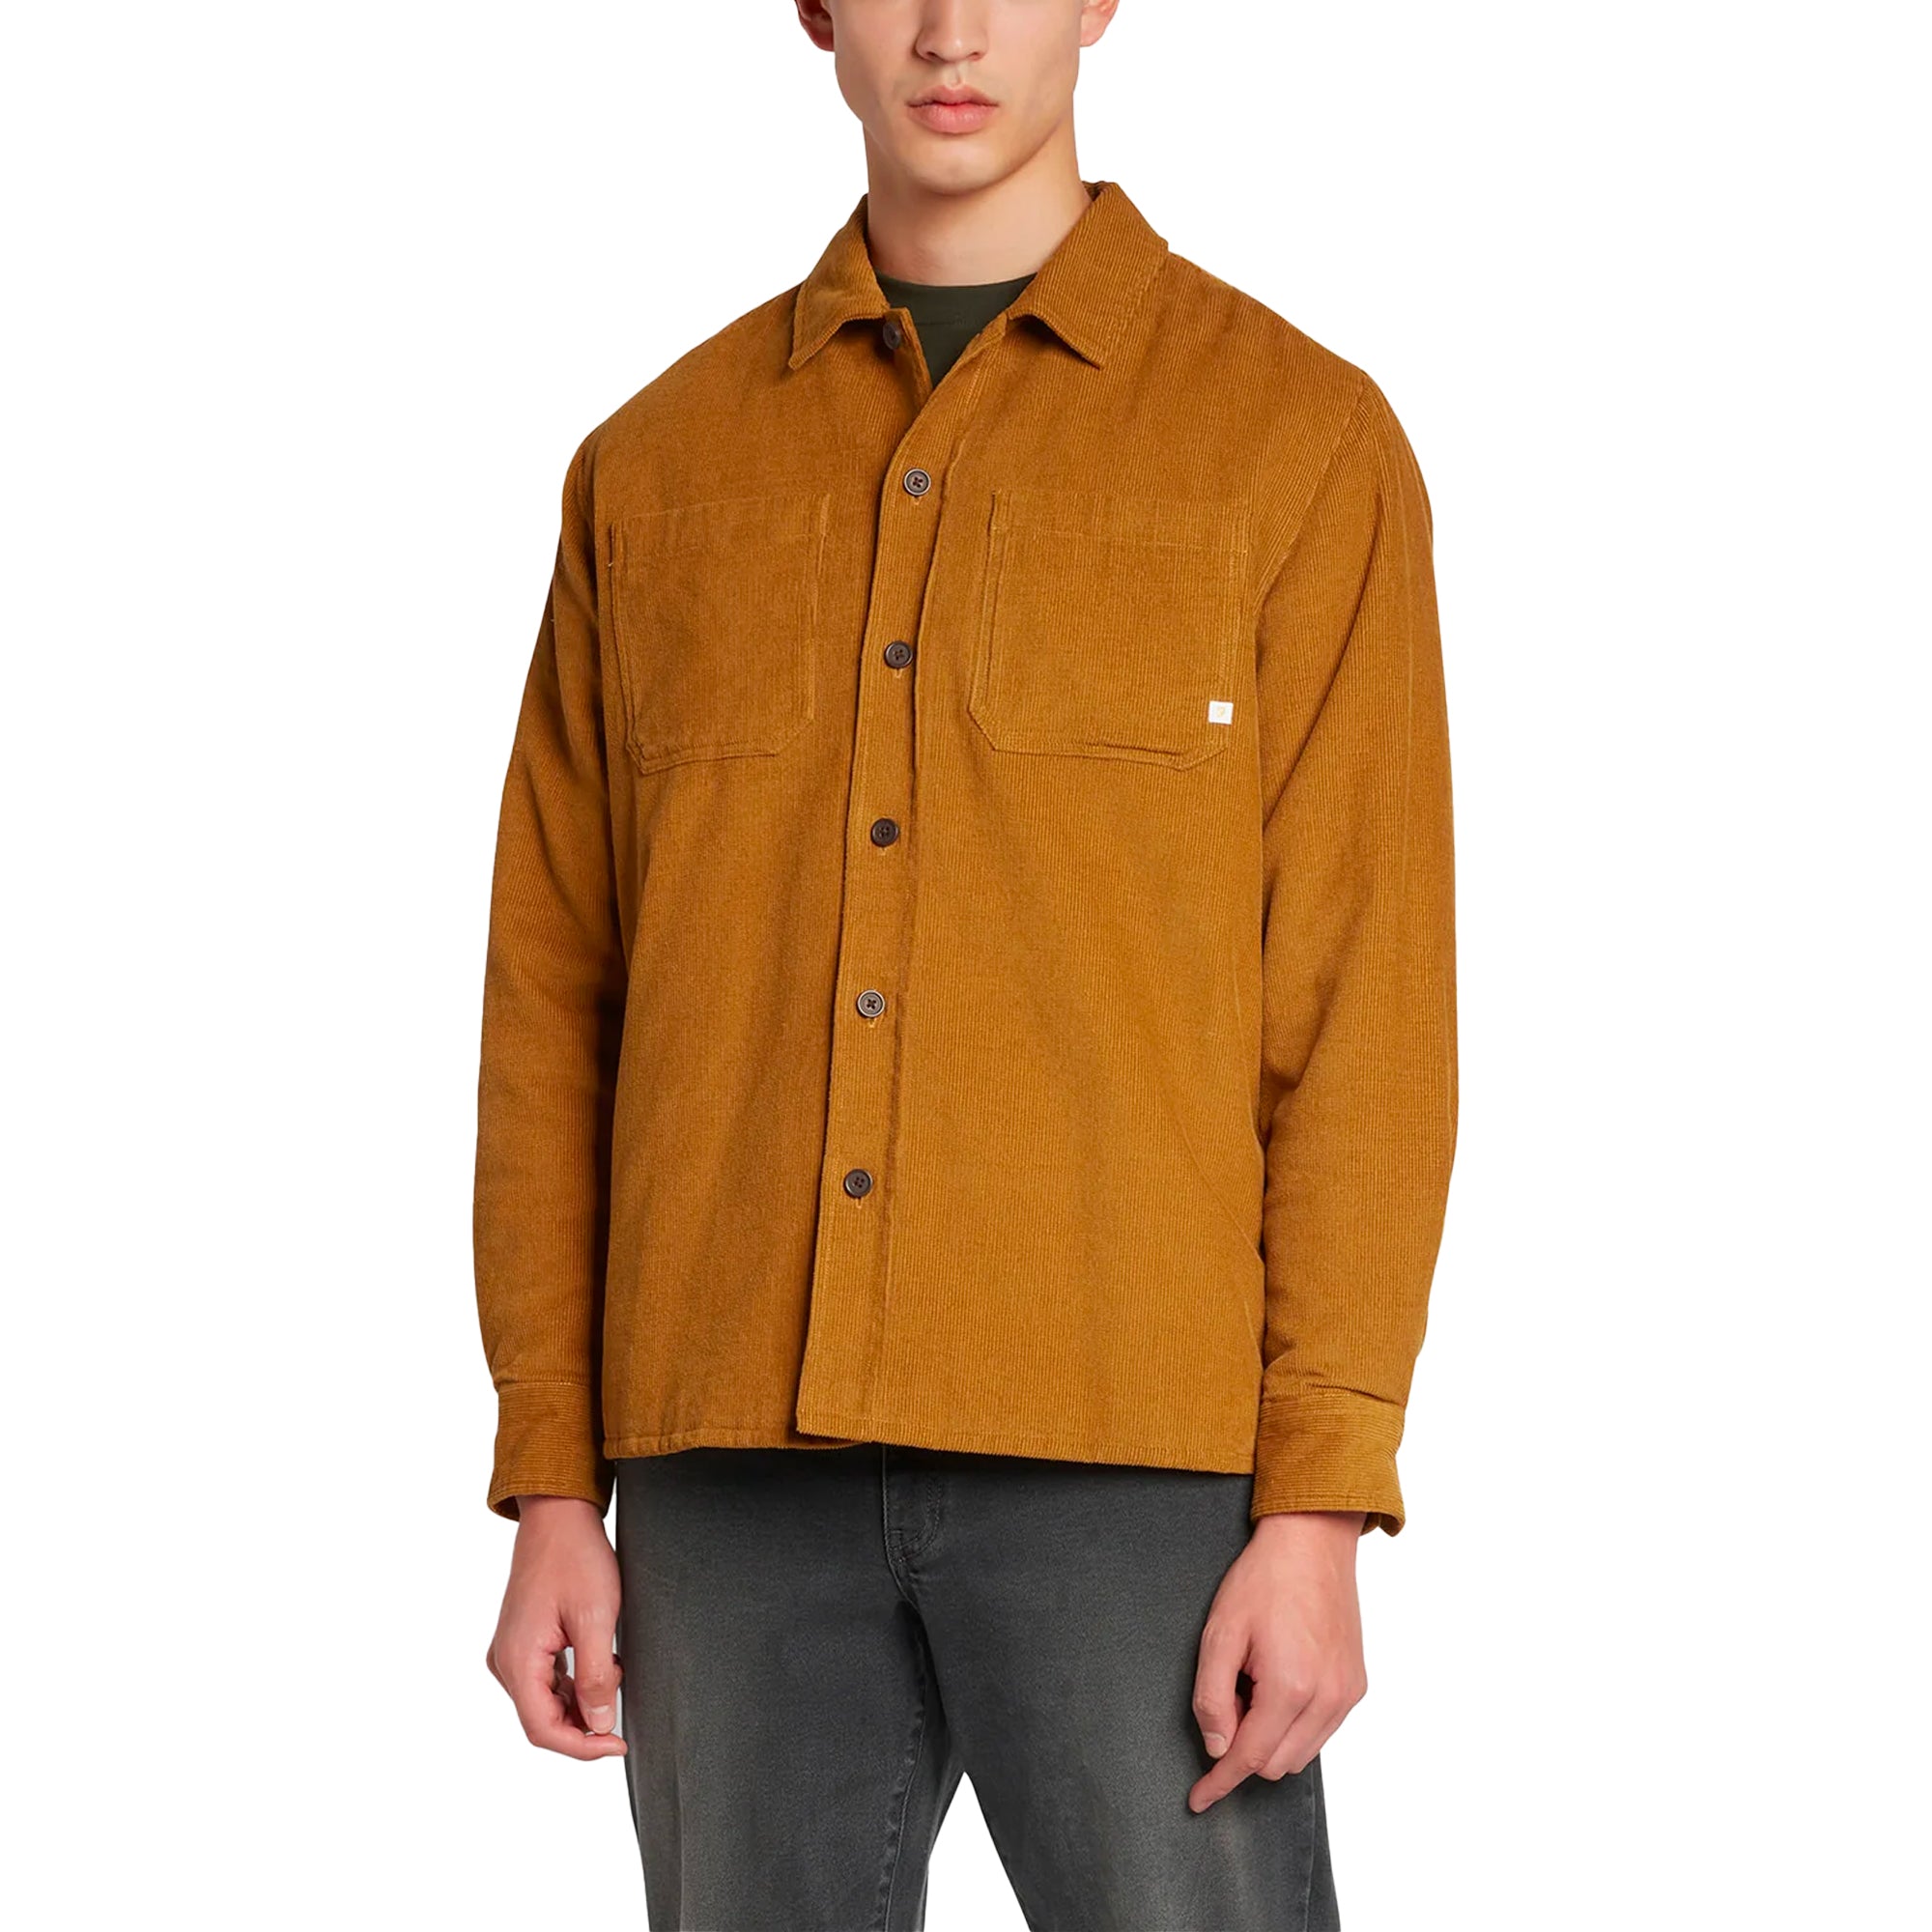 Farah Hunter Quilted Corduroy Overshirt - Rich Tobacco